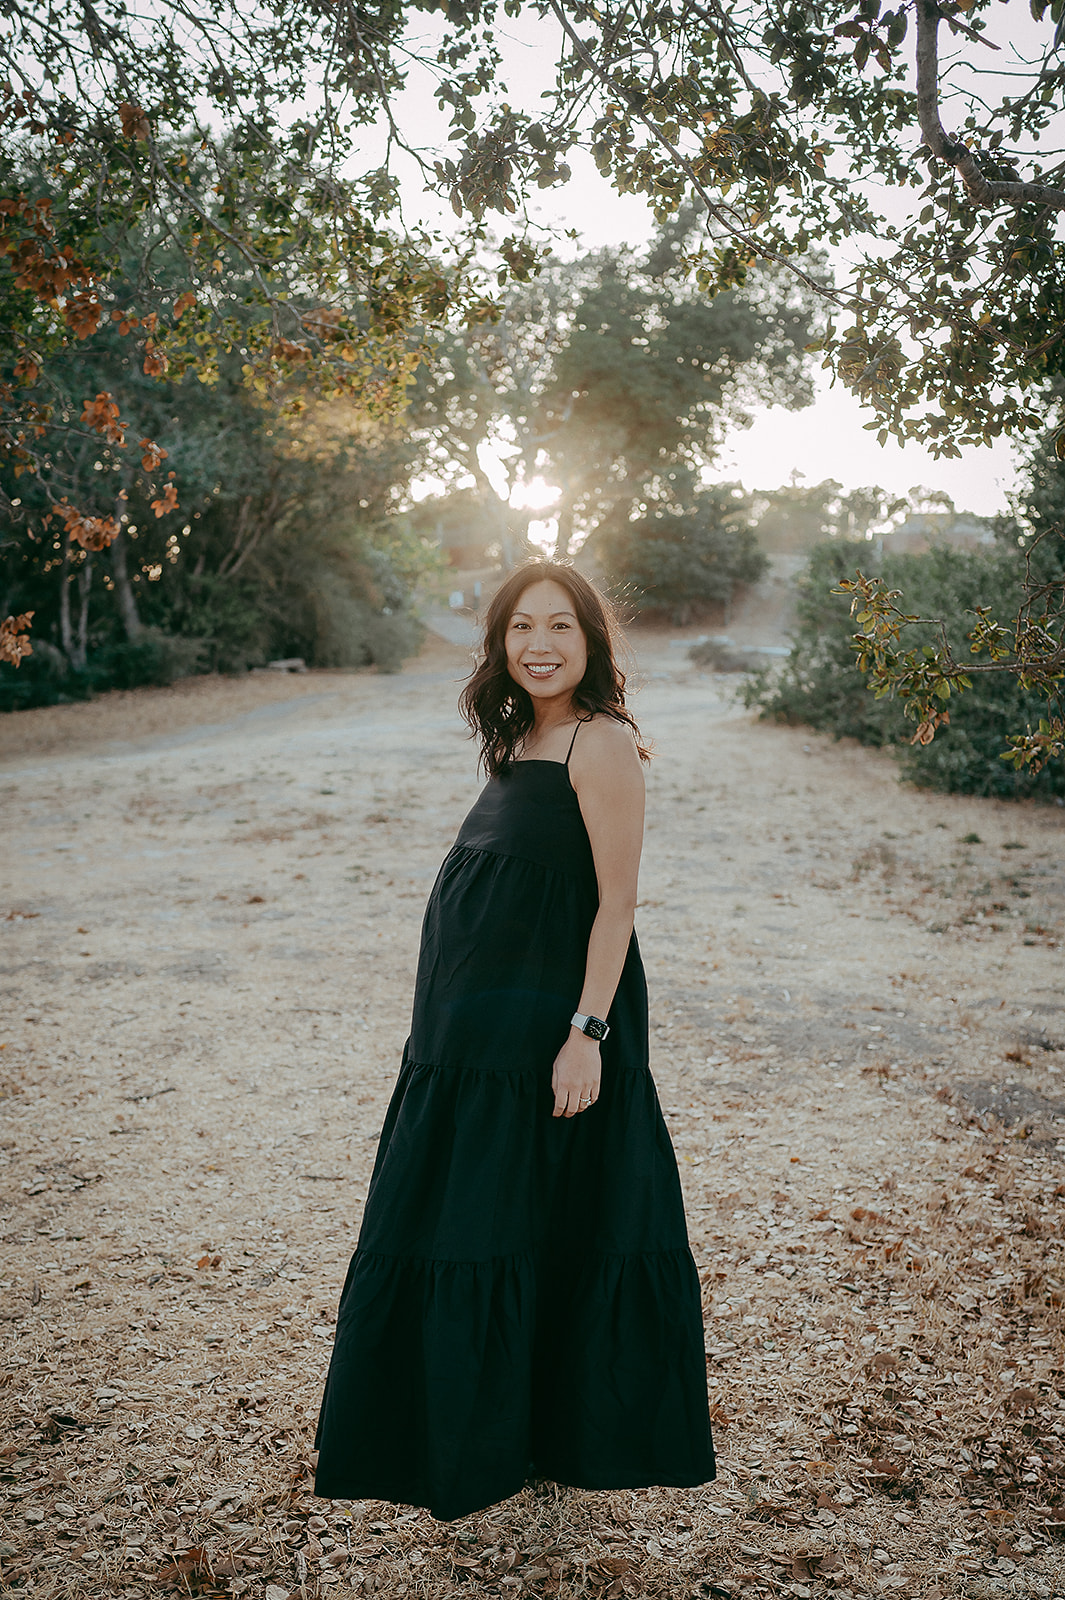 Pregnant woman wearing black dress for maternity photos